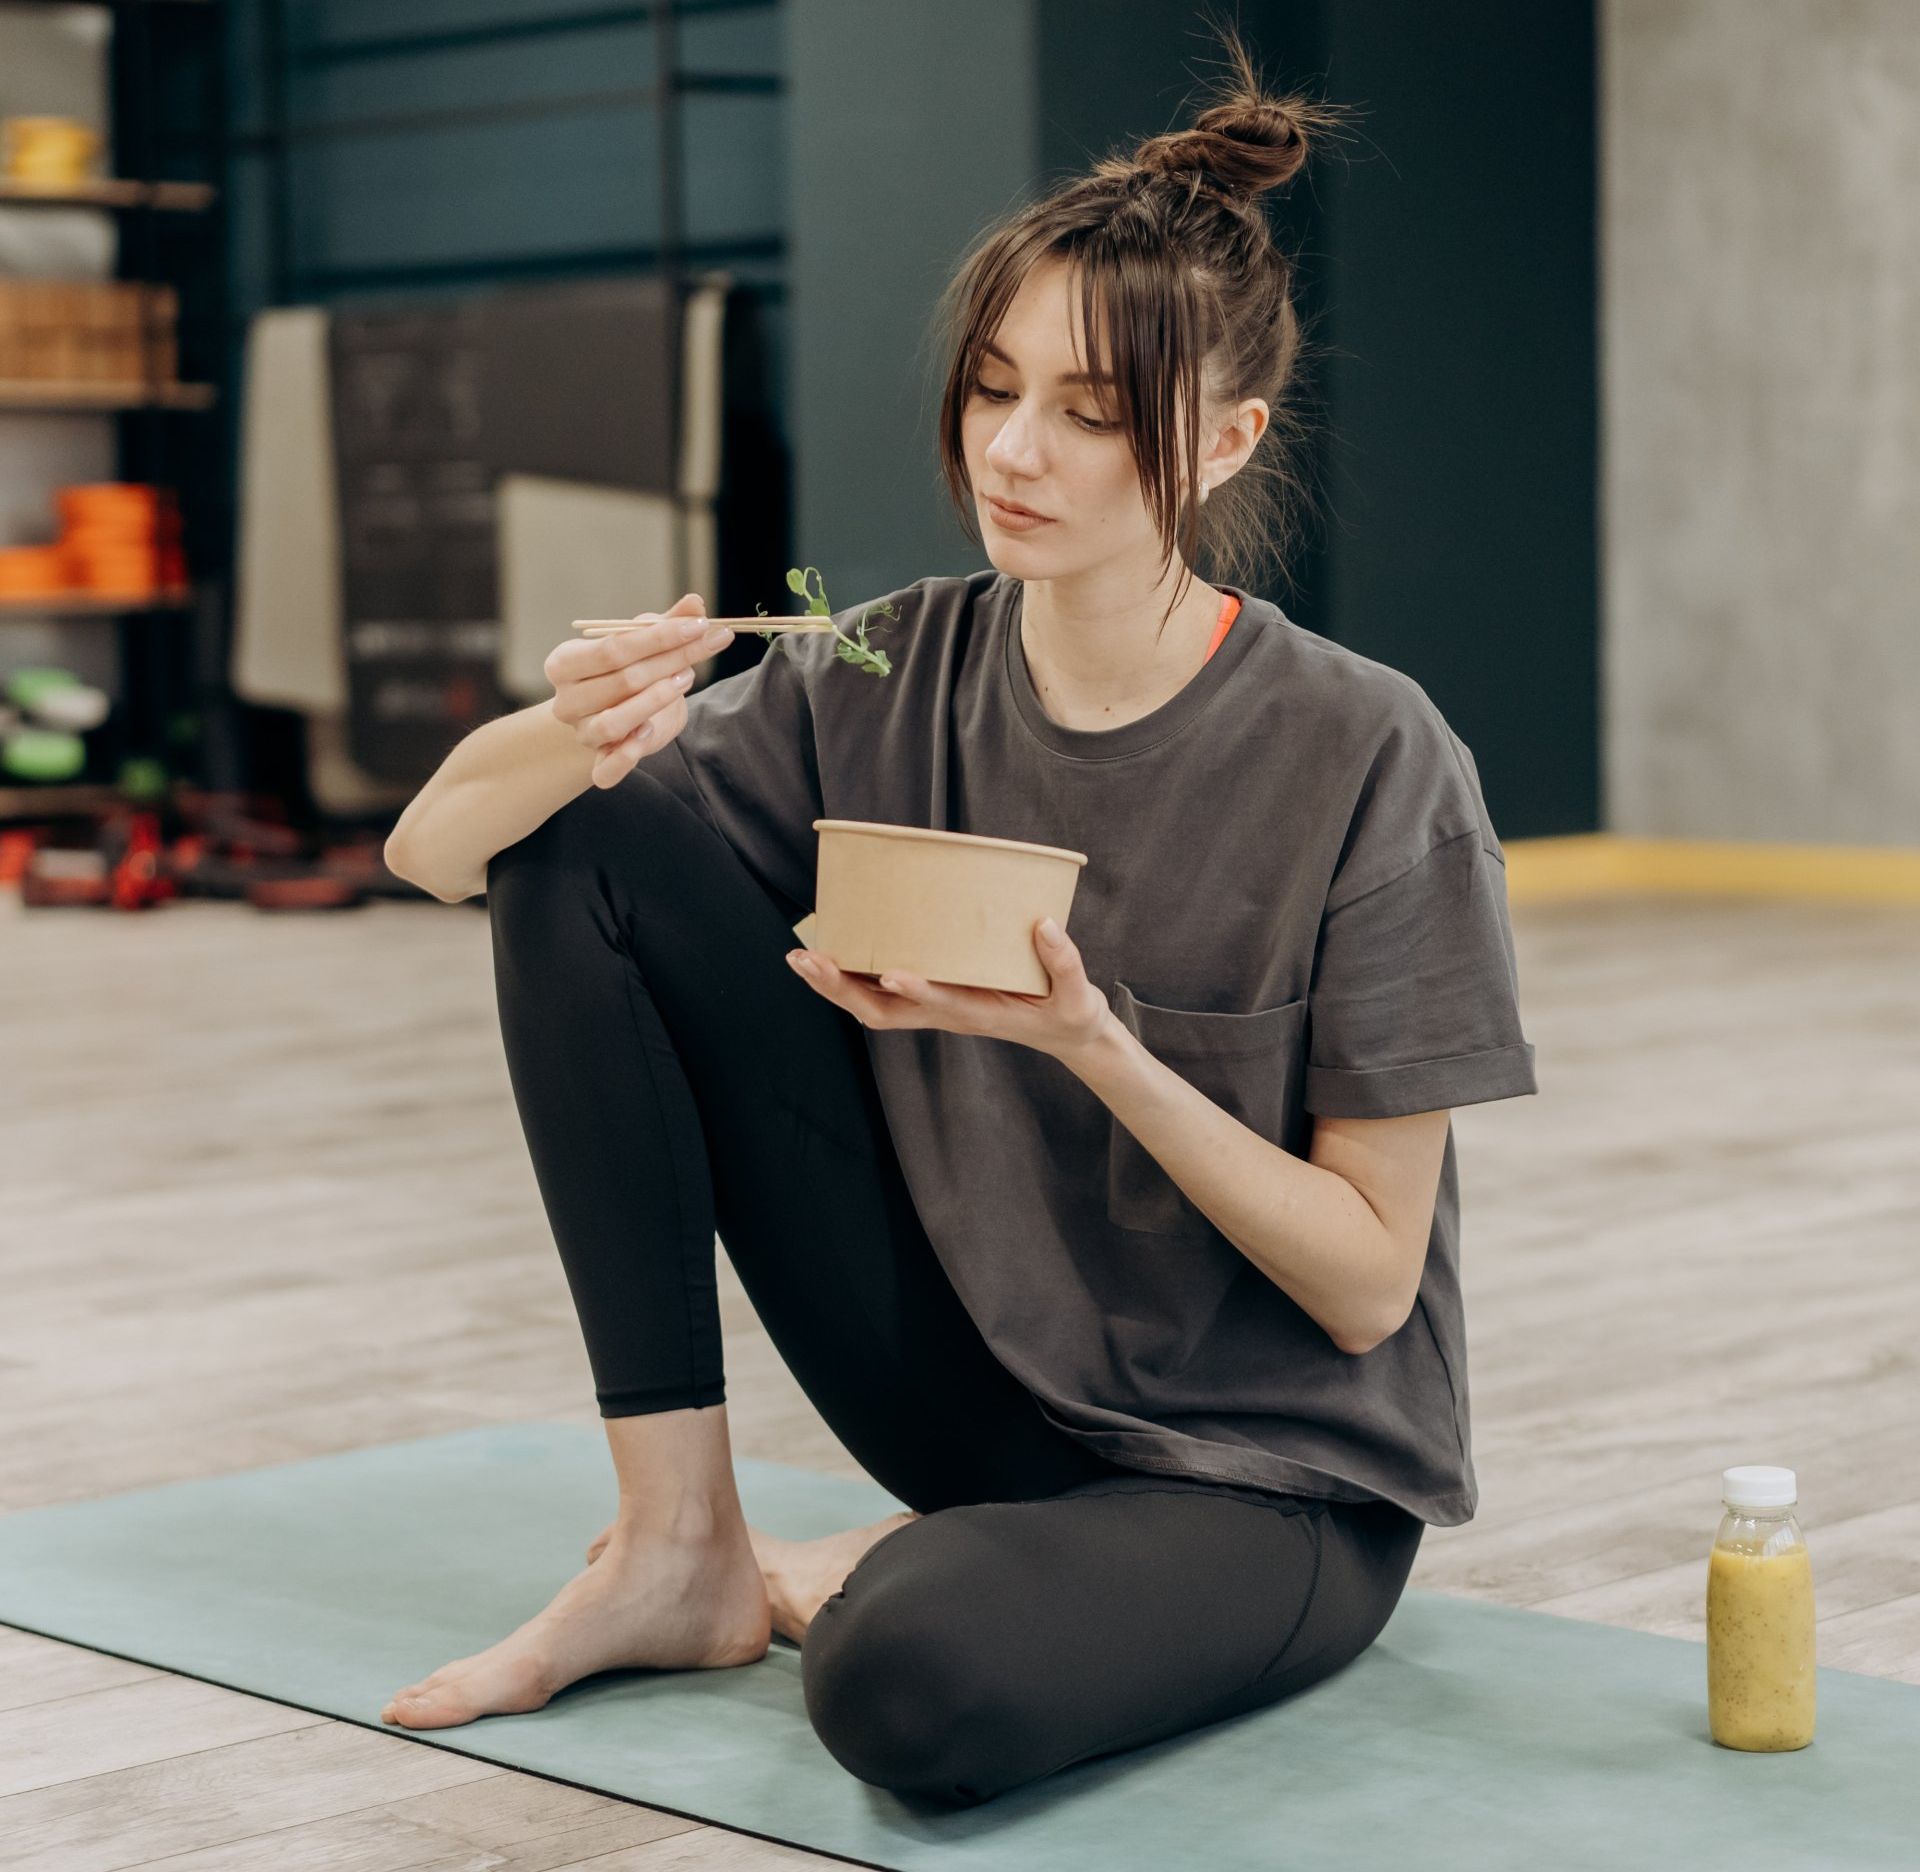 a woman is sitting on a yoga mat eating food .